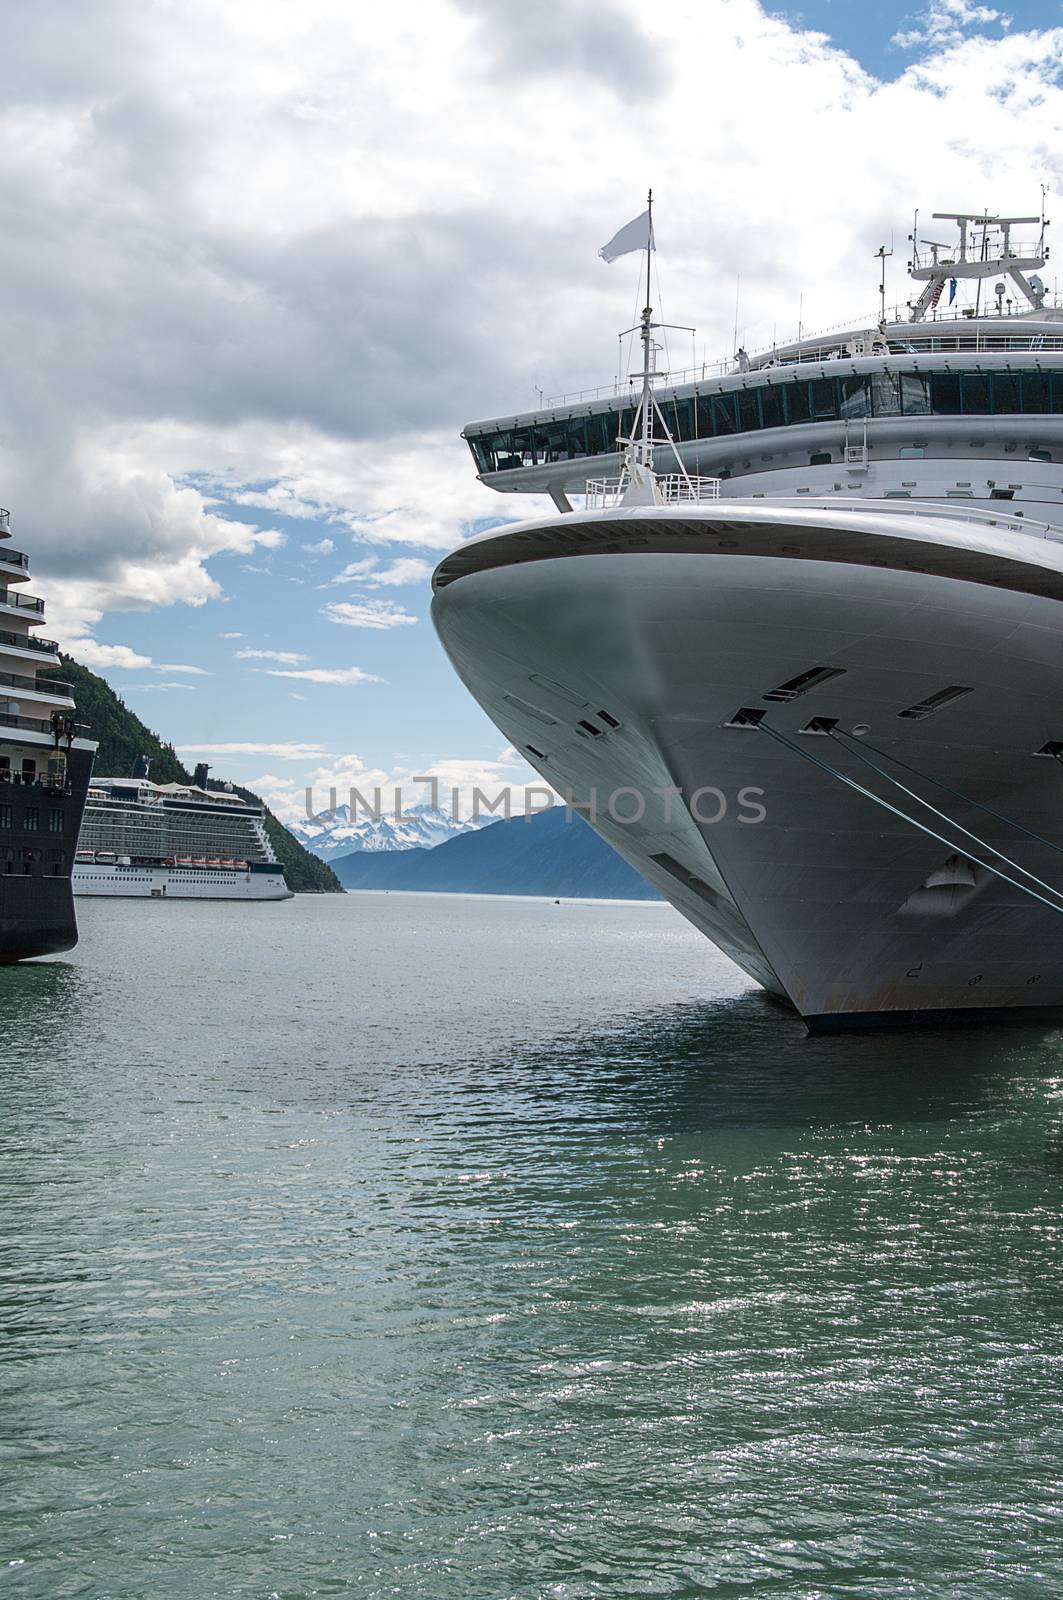 Cruise Ships at Harbour in Skageway  by edcorey